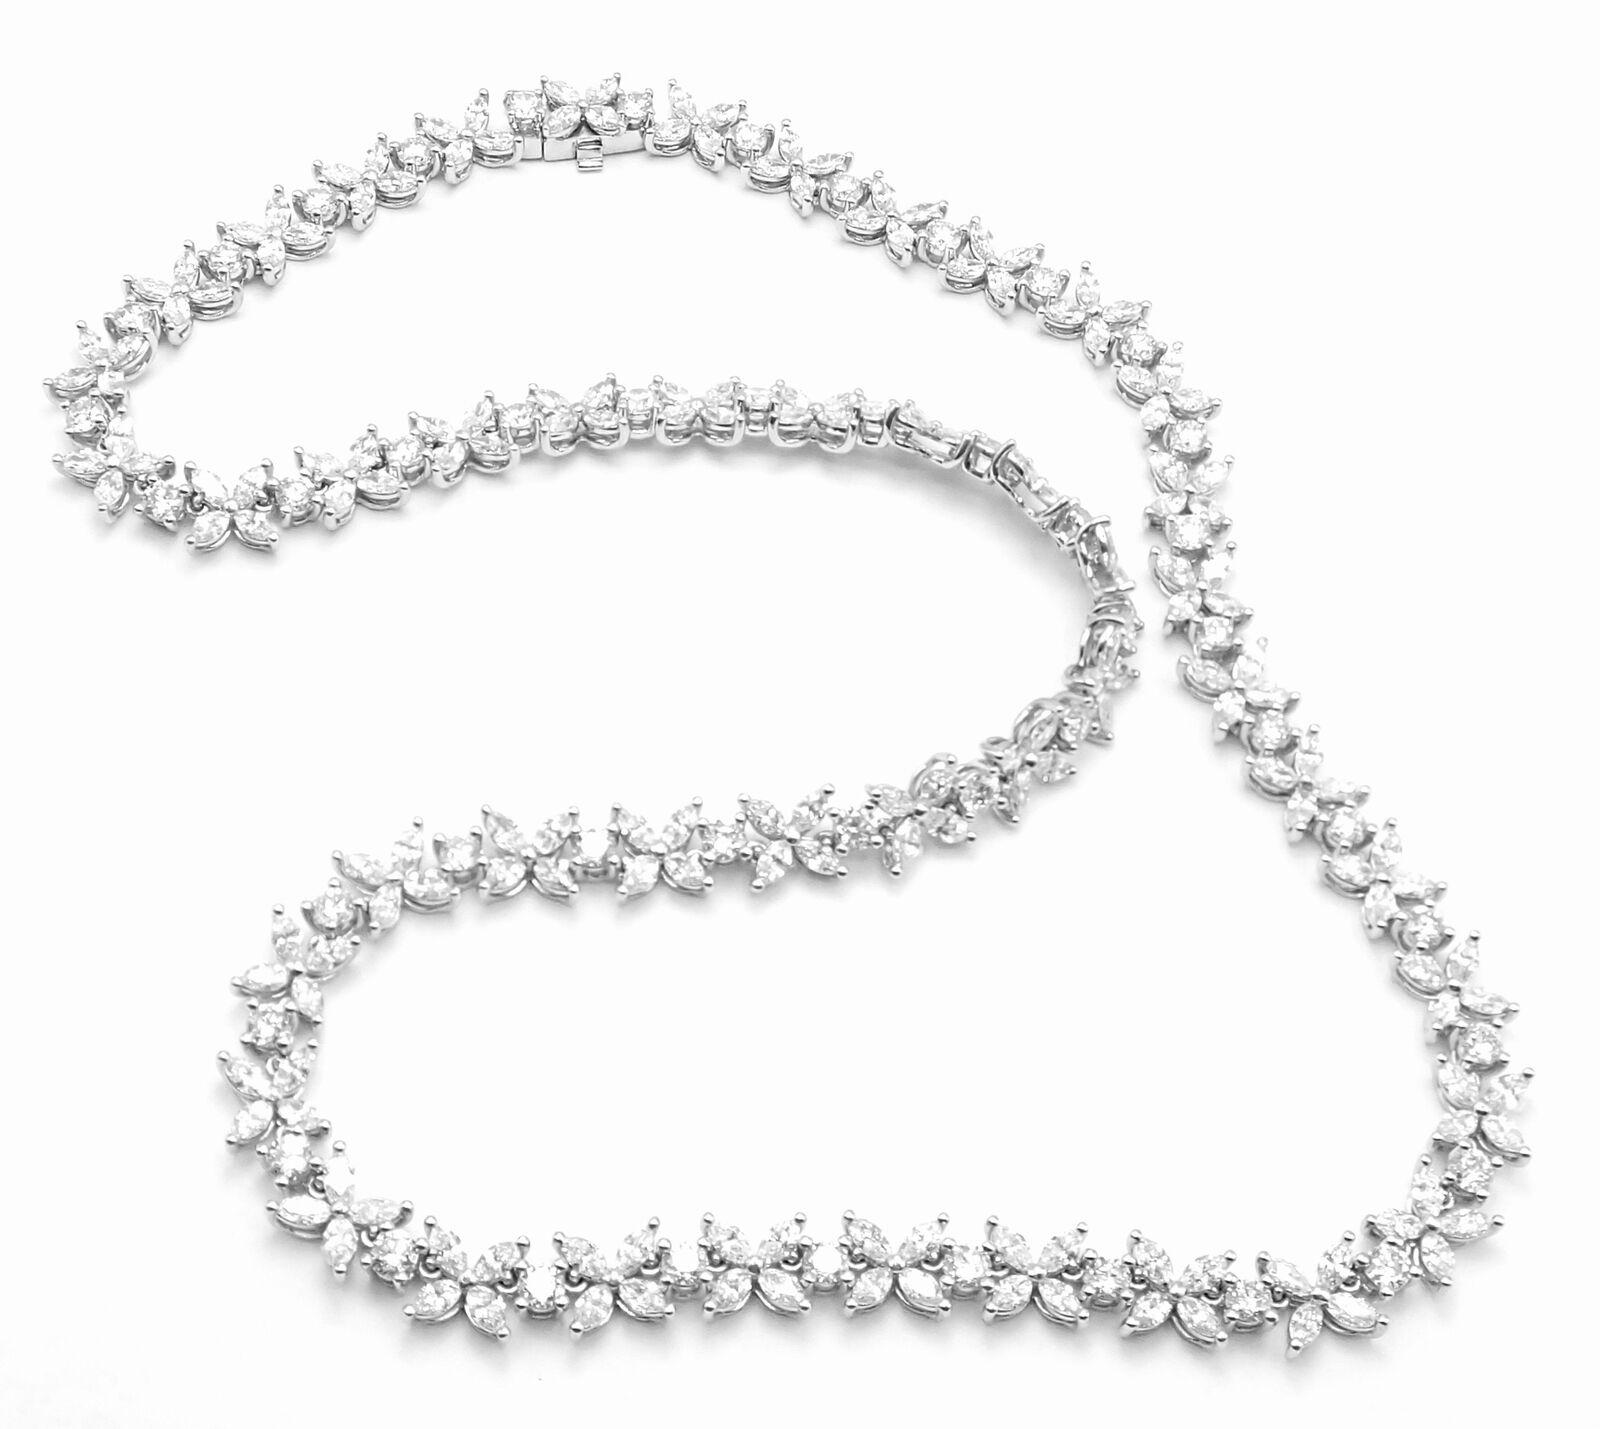 Platinum Diamond Victoria Alternating Graduated Necklace by Tiffany & Co. 
With 146 Round brilliant cut diamonds VS1 clarity, G color total weight approx. 5.52ct
224 Marque diamonds VS1 clarity, G color total weight approx. 7.20ct
This necklace